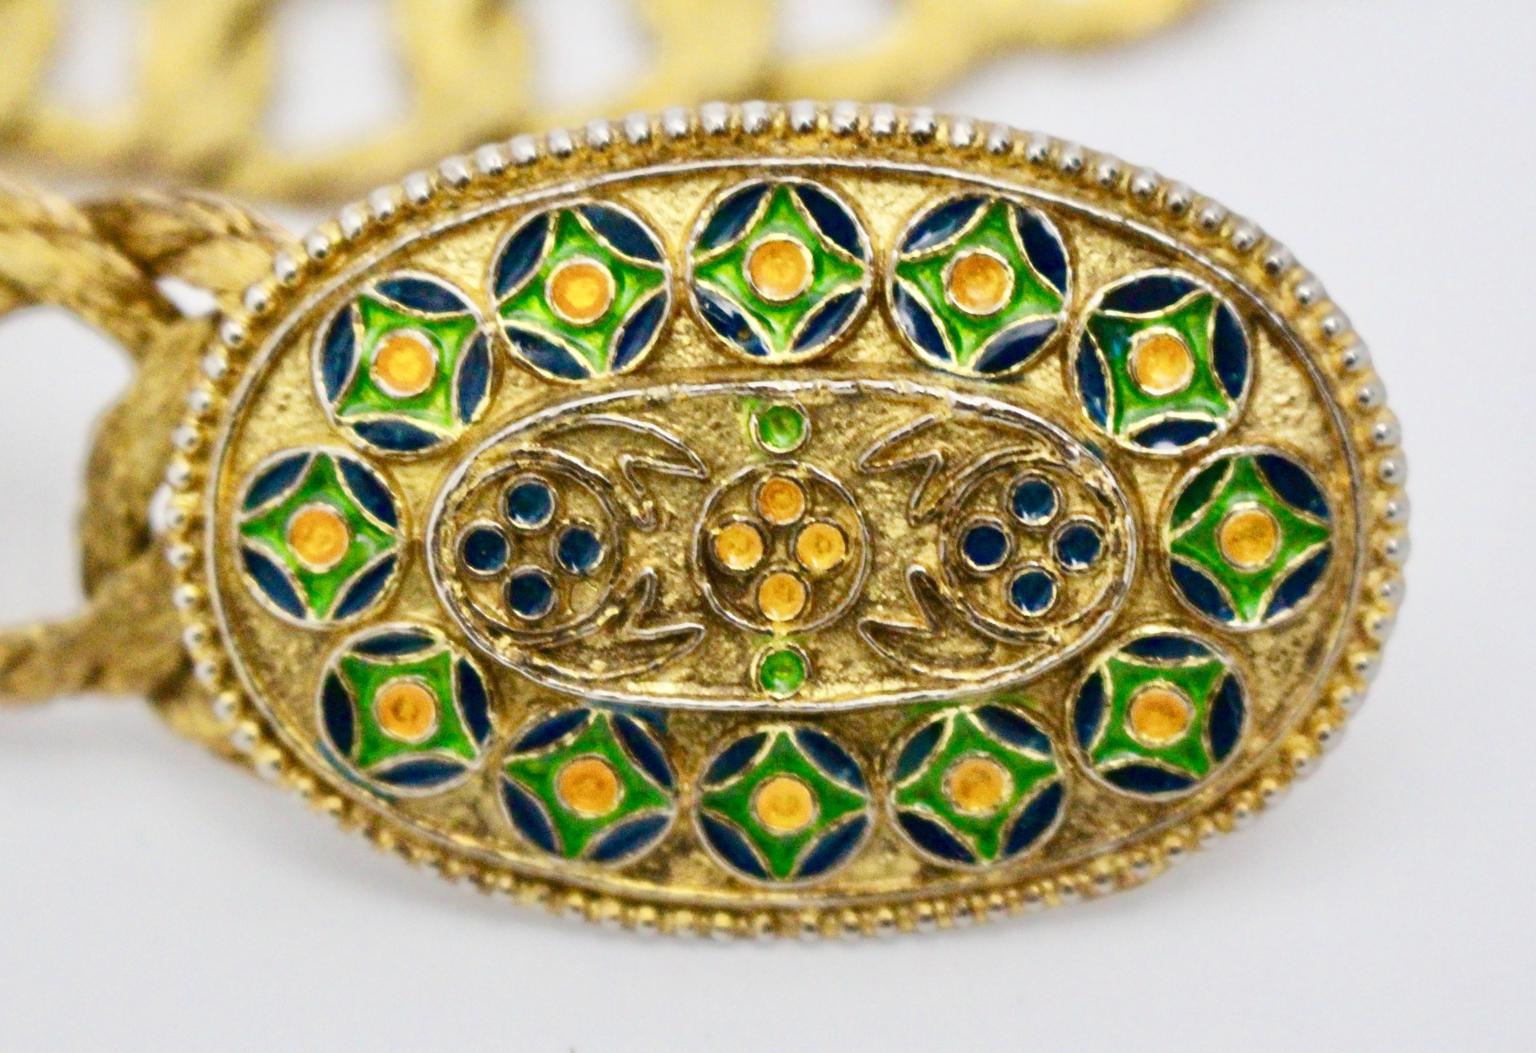 Vintage Gilt Chain Belt with a multicolored enamelled belt buckle 1960s For Sale 6